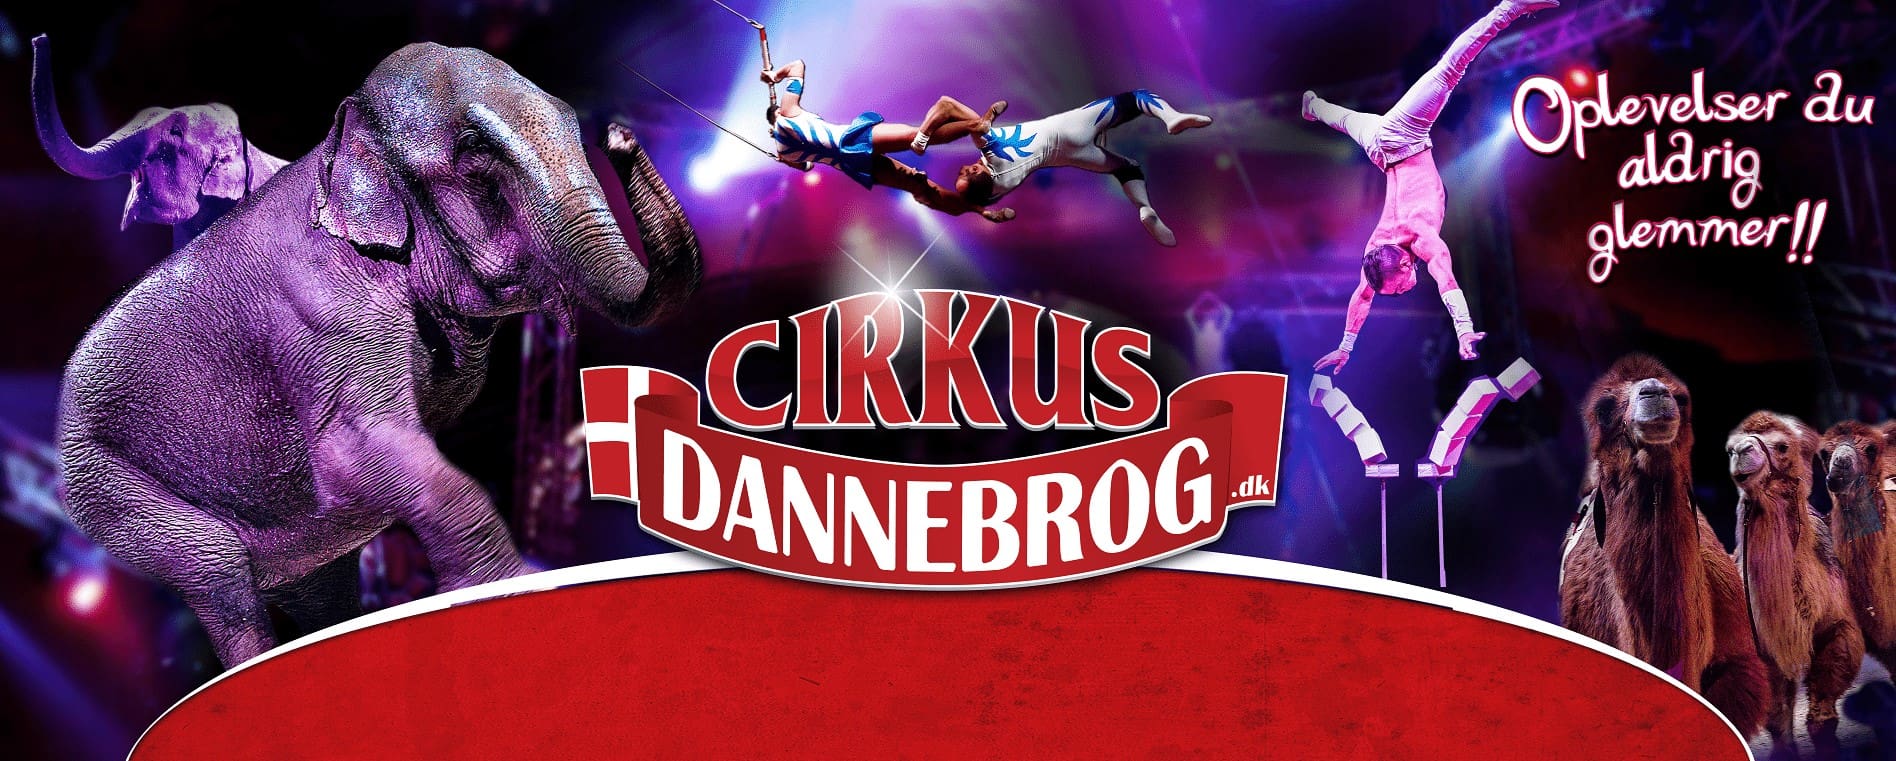 9-facts-you-must-know-about-cirkus-dannebrog